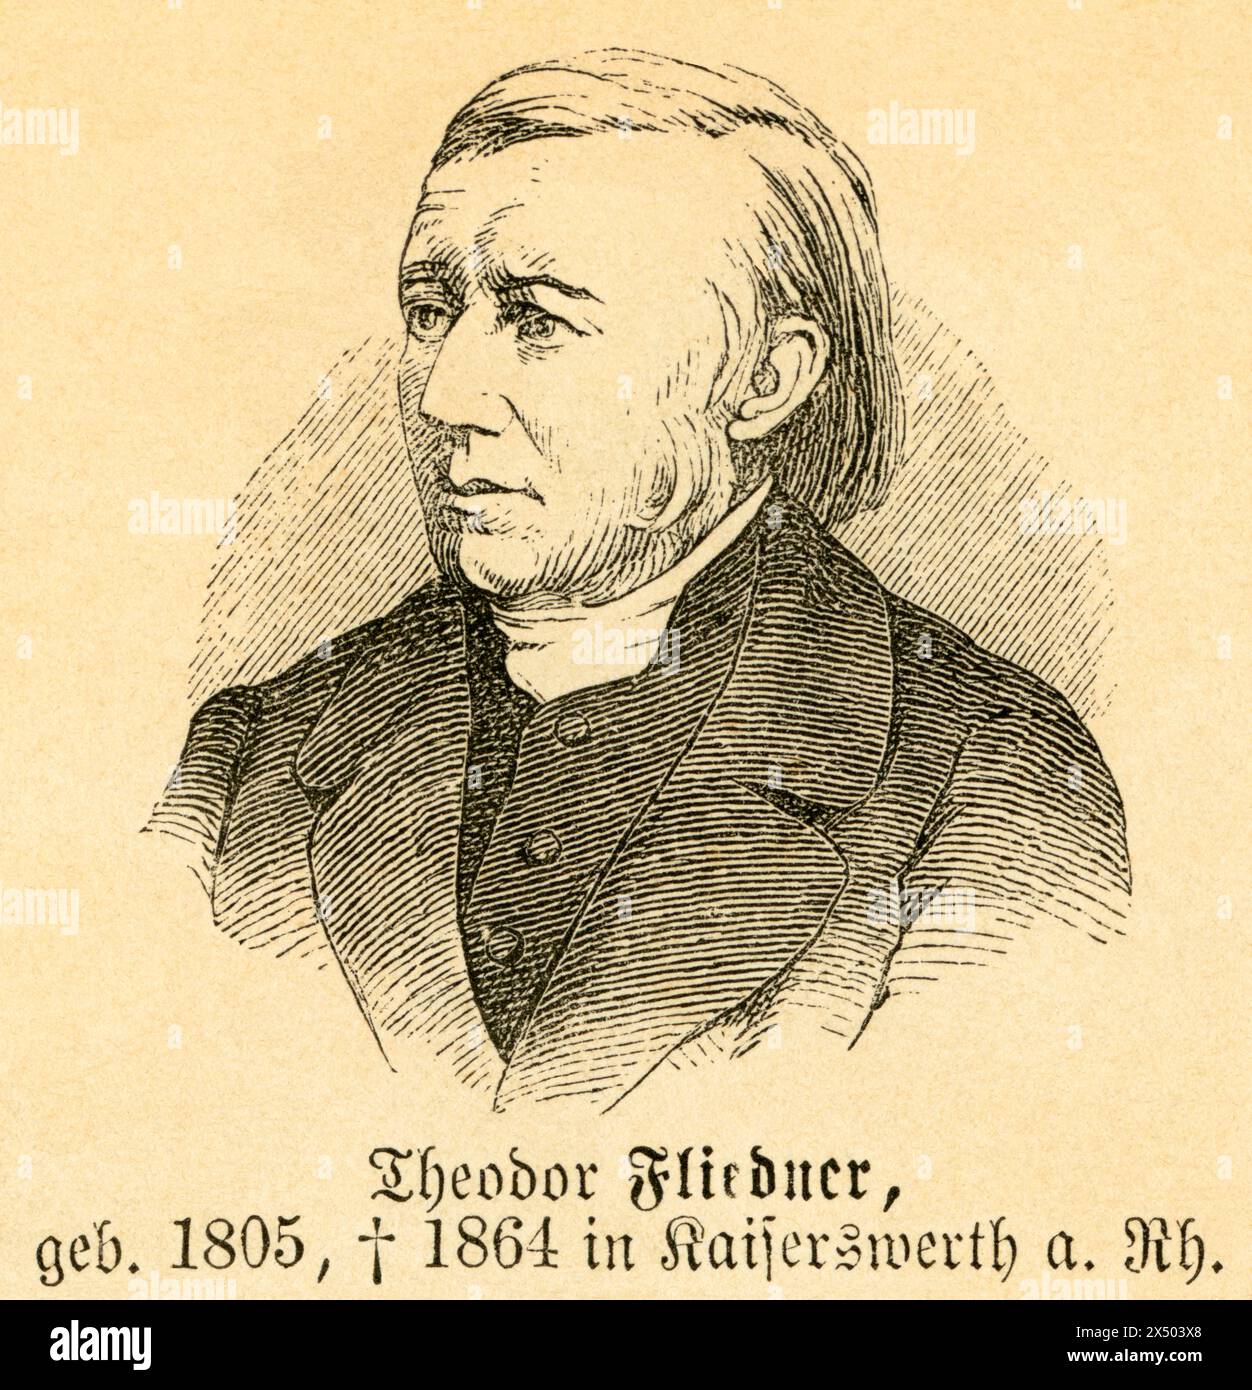 Theodor Fliedner, theologian and social reformer, ARTIST'S COPYRIGHT HAS NOT TO BE CLEARED Stock Photo